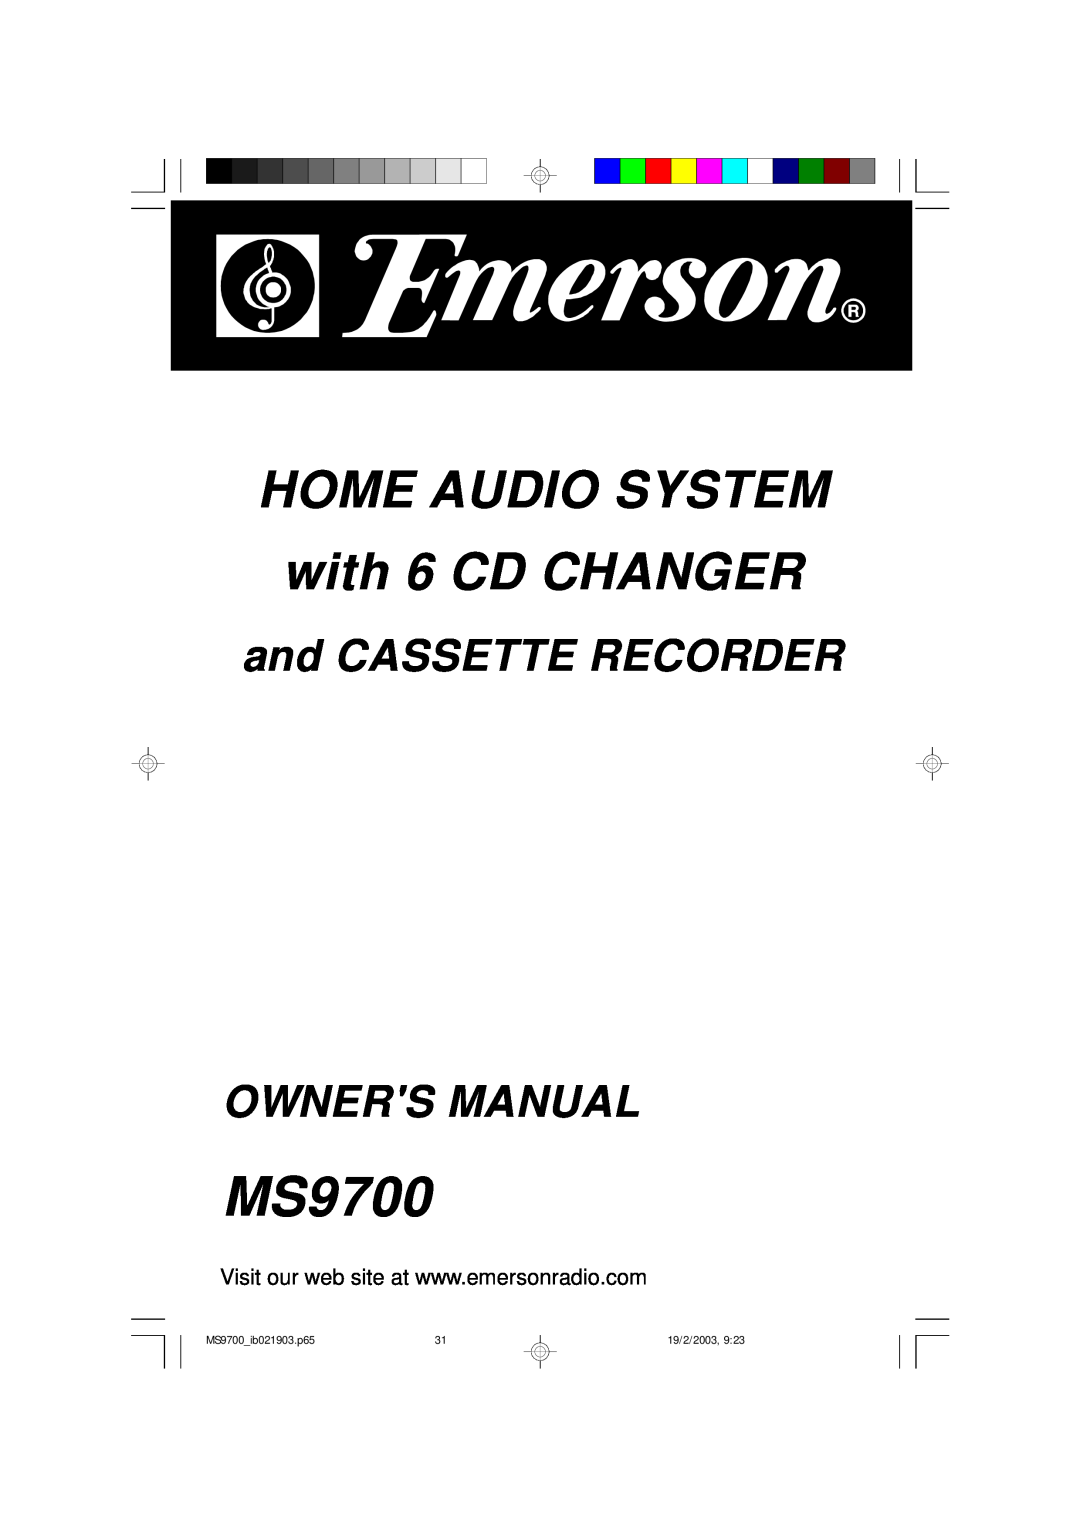 Emerson owner manual HOME AUDIO SYSTEM with 6 CD CHANGER, MS9700 ib021903.p65, 19/2/2003 